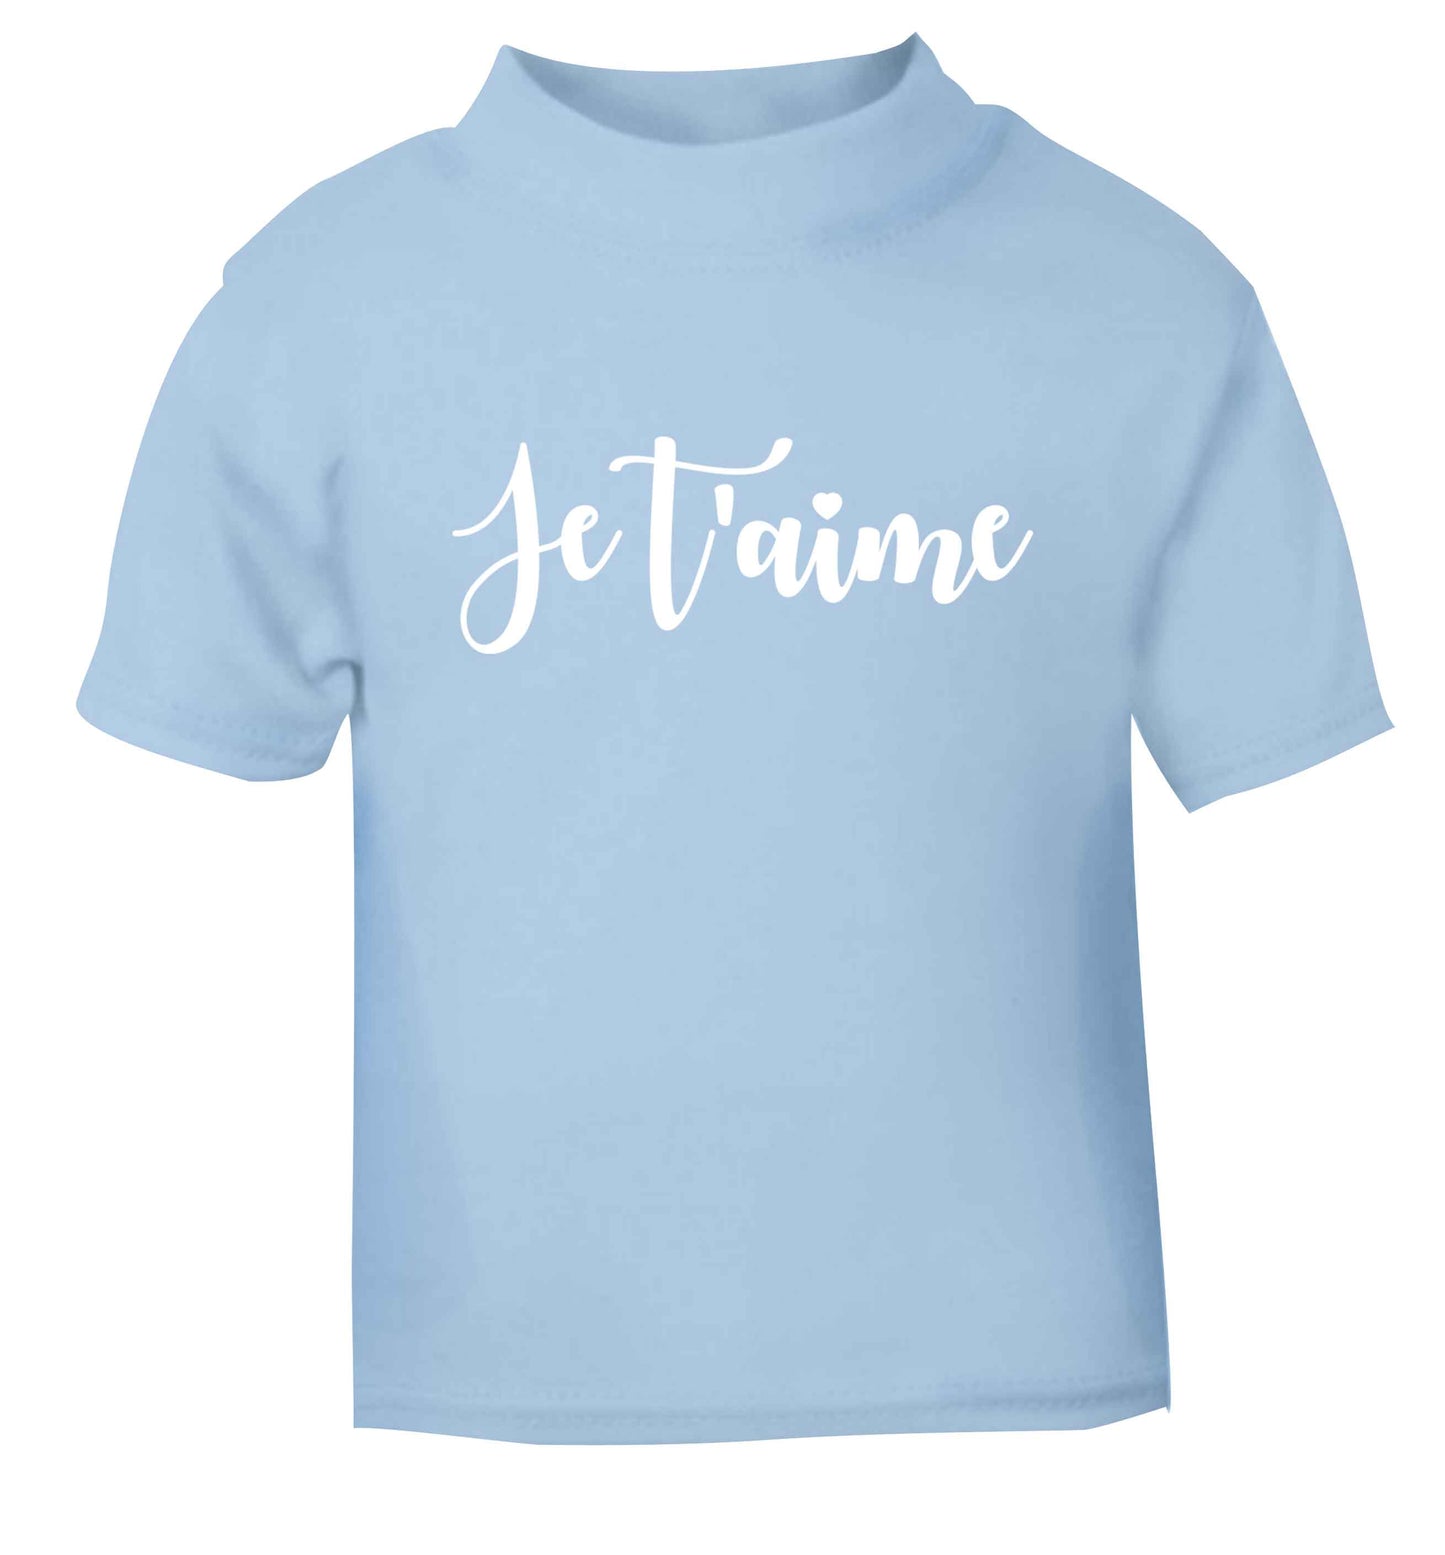 Je t'aime light blue baby toddler Tshirt 2 Years